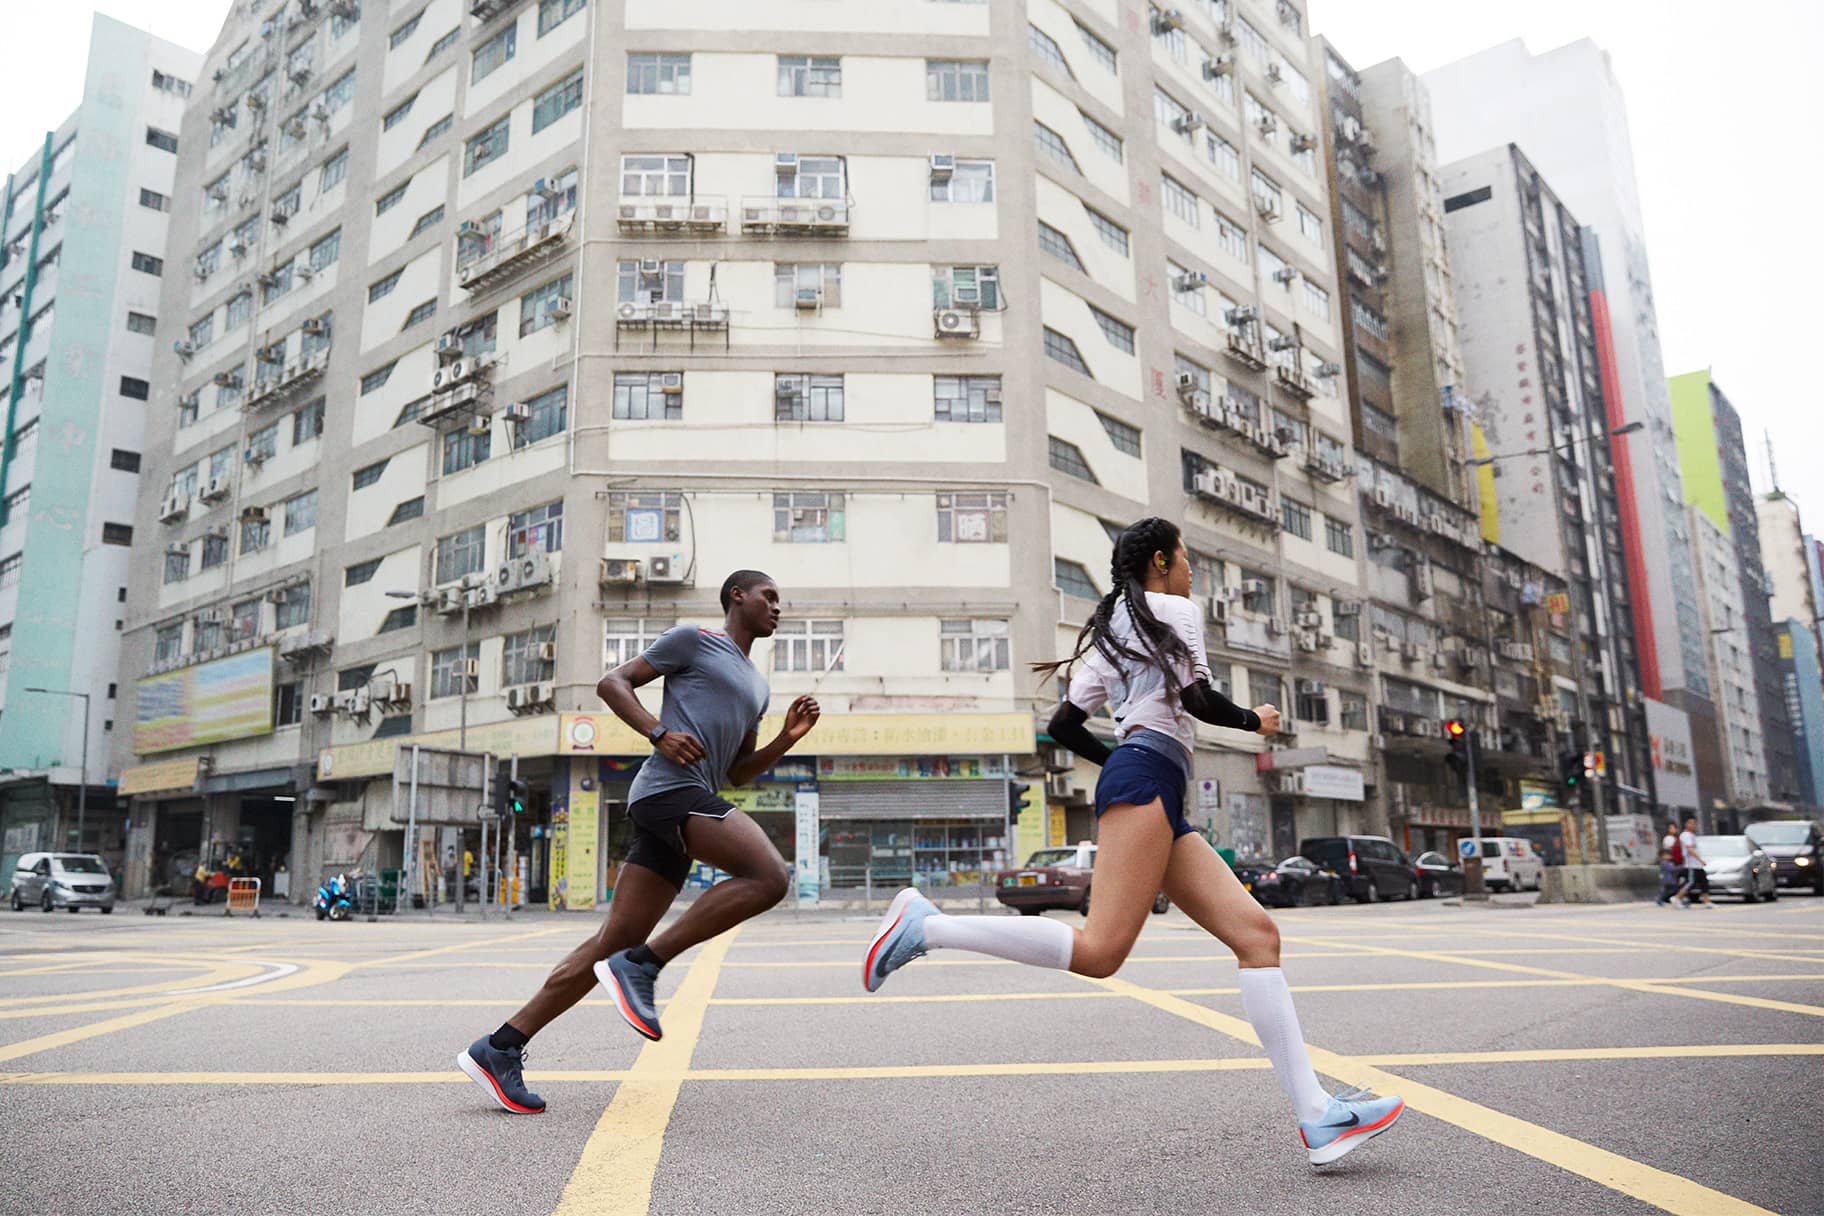 How to Master Proper Running Form, According to Experts